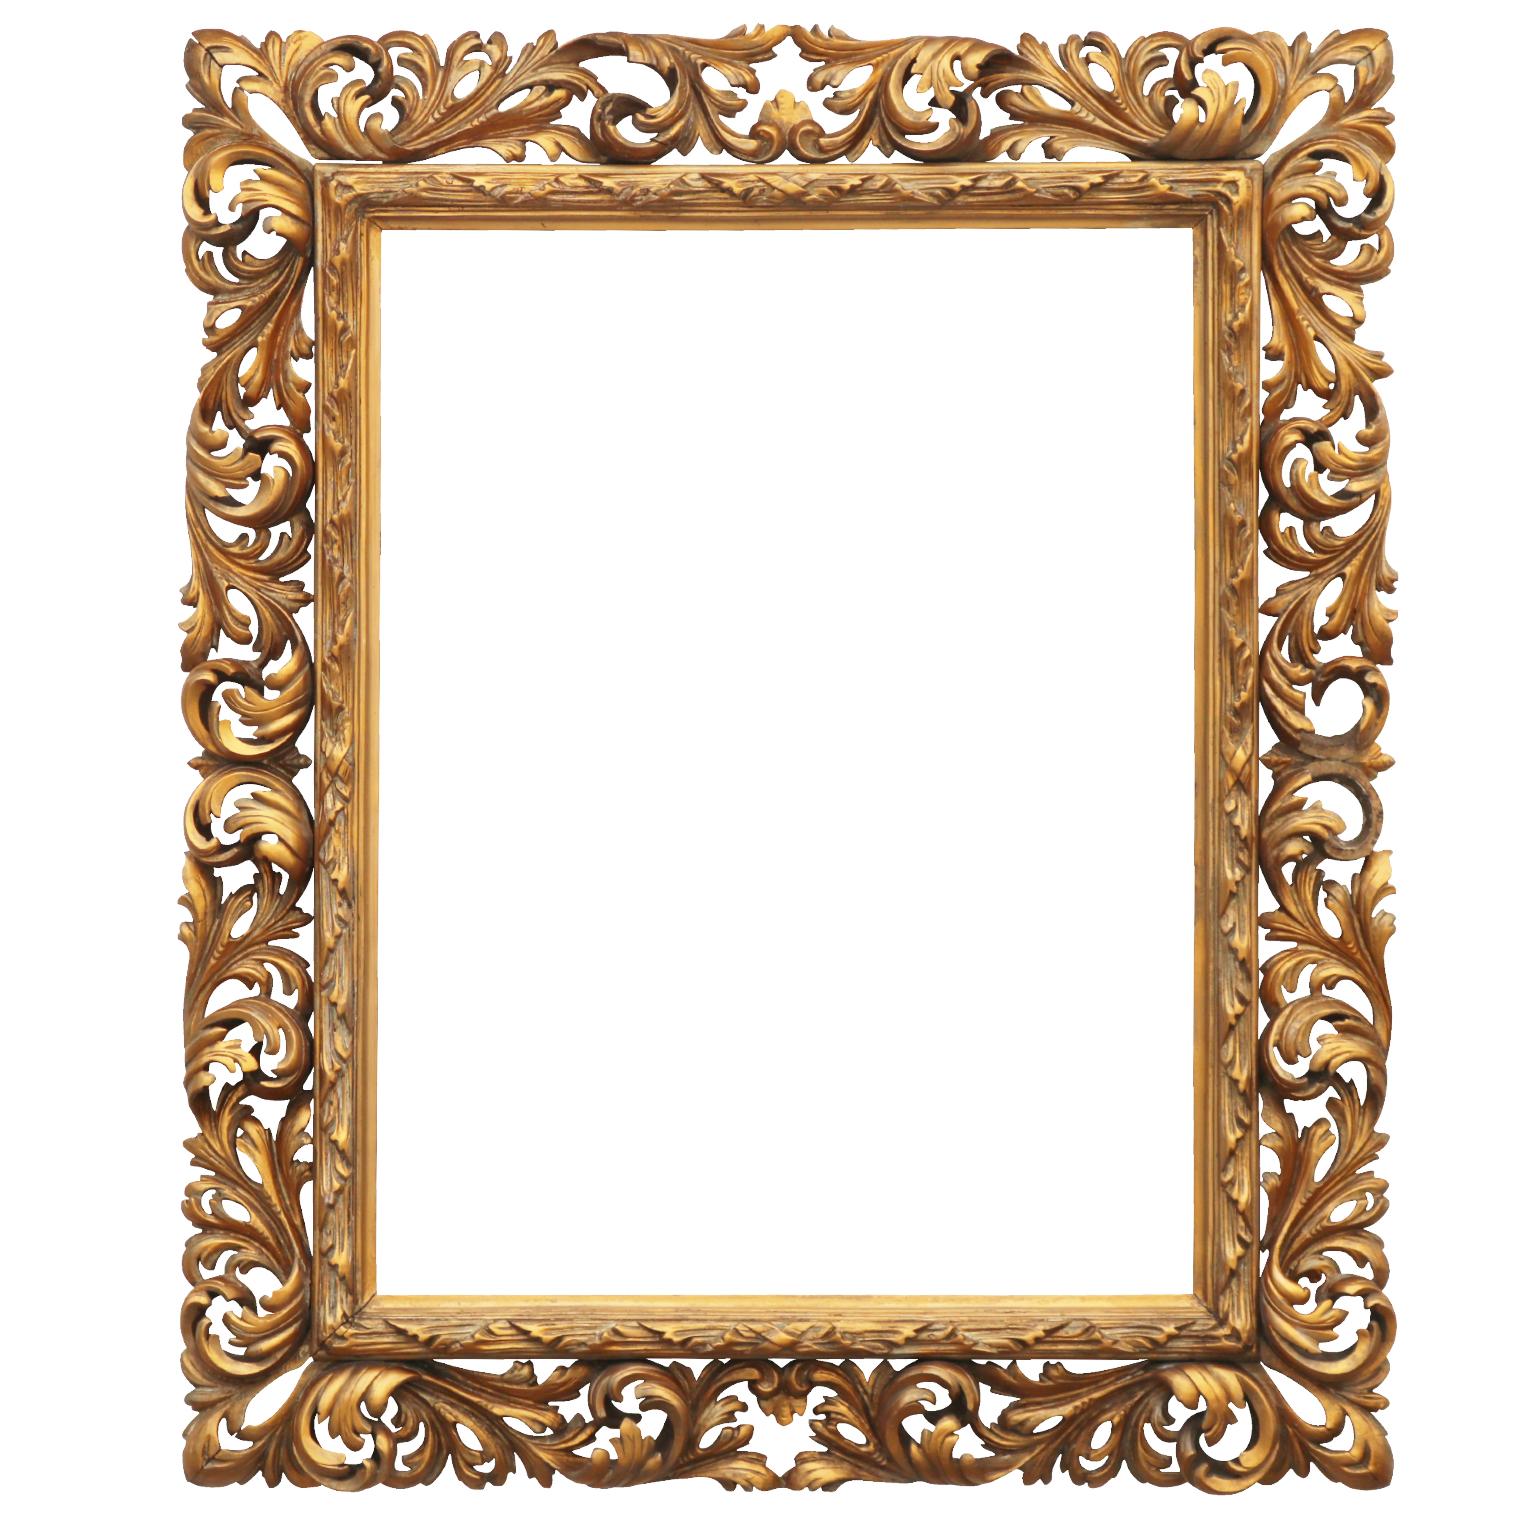 Late 18th century. Italian carved and gilded frame in the 17th century. Florentine style.

This frame is carved linden wood with a floral motif at the sight edge with center straps. The outer portion consists of large curling leaves that are